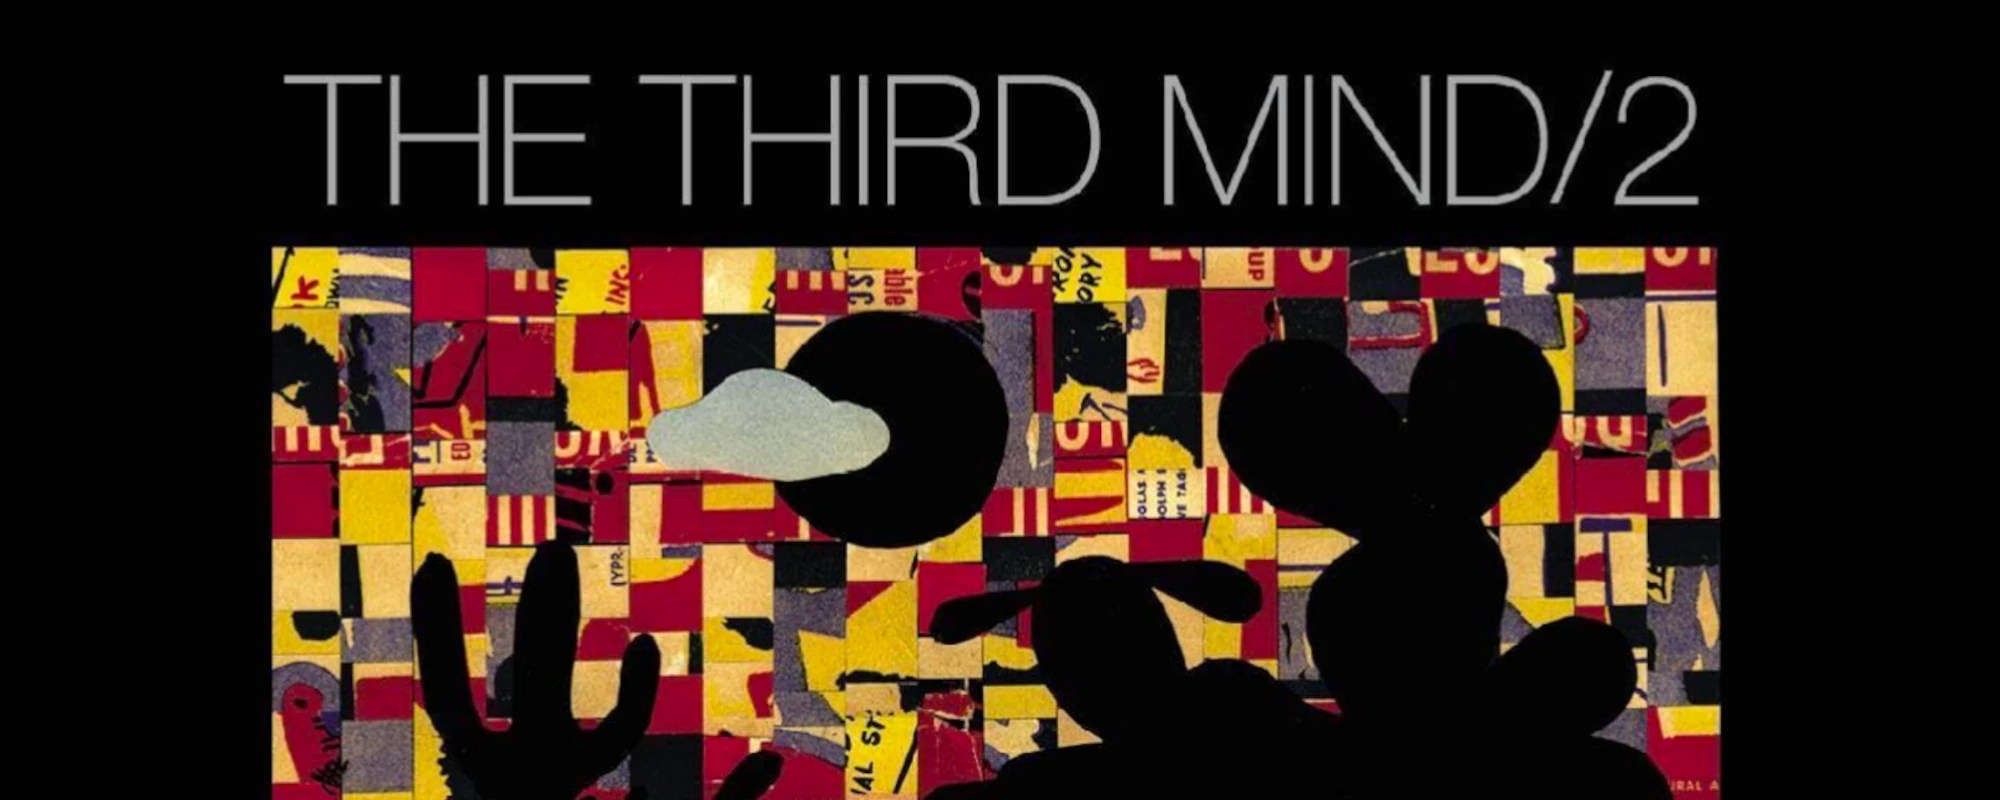 Review: The Third Mind Take an Enthralling Voyage with ‘The Third Mind/2’